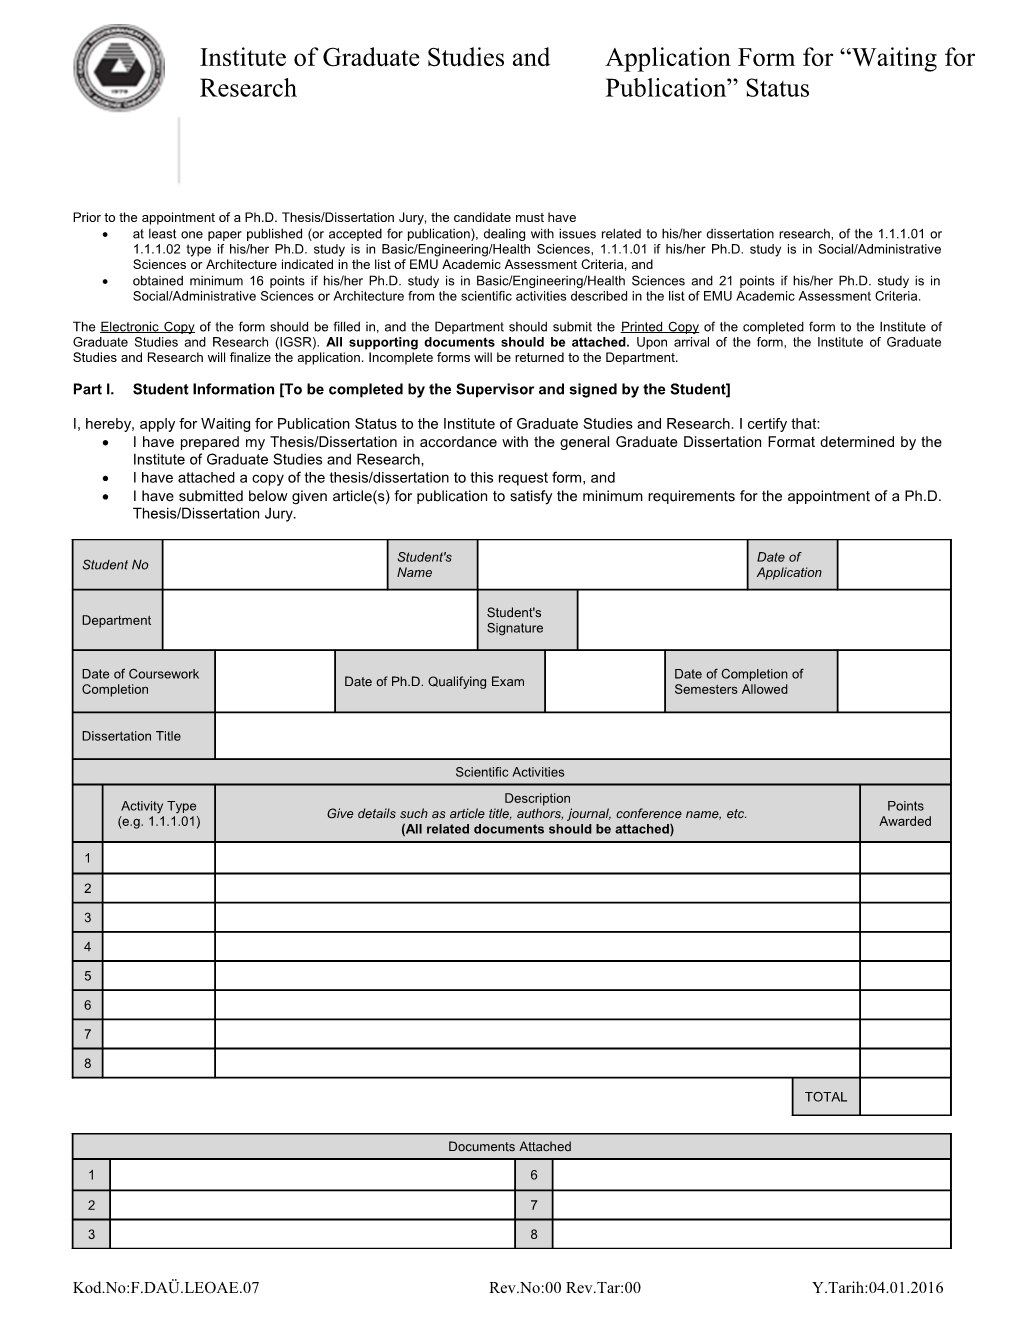 Aplication Form for Waiting for Publication Status